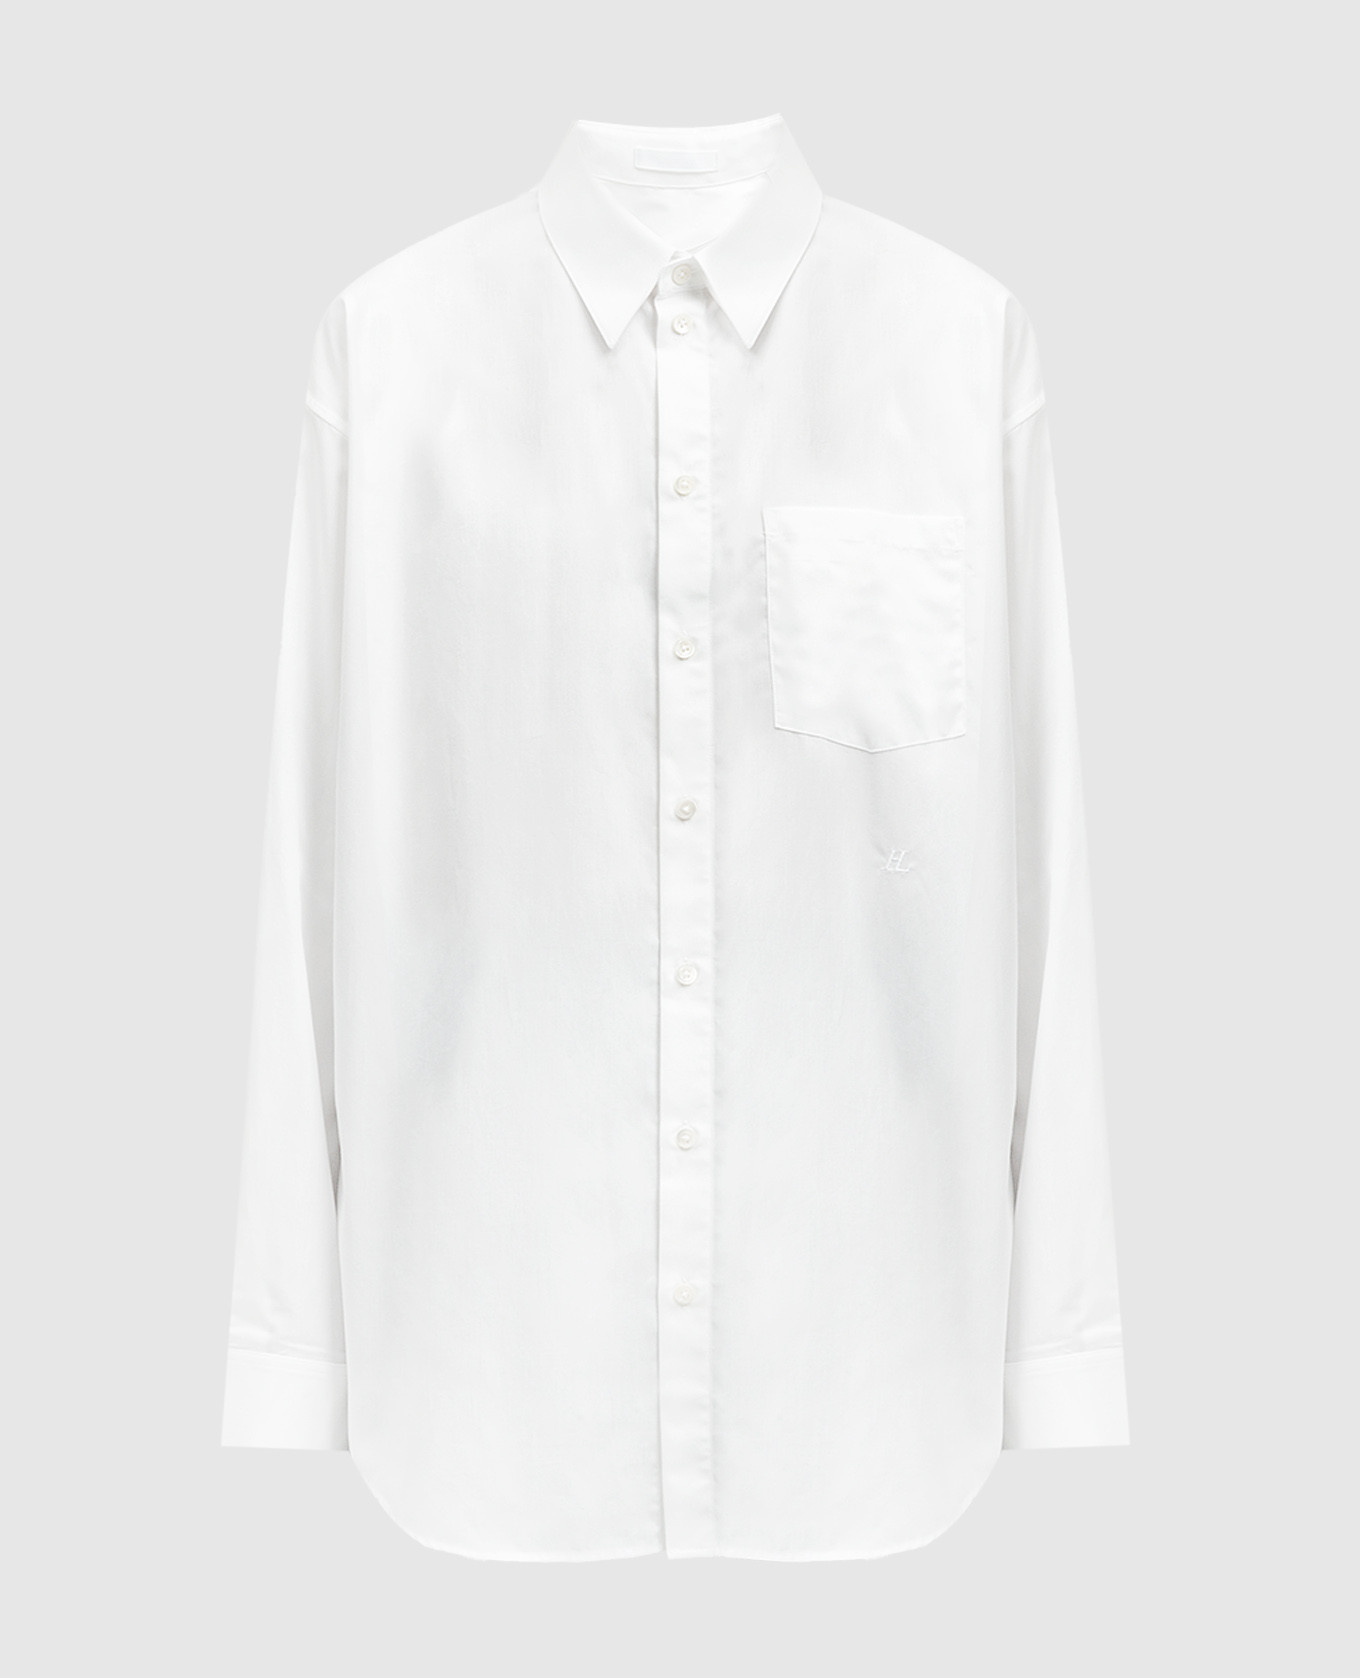 White shirt with monogram embroidery